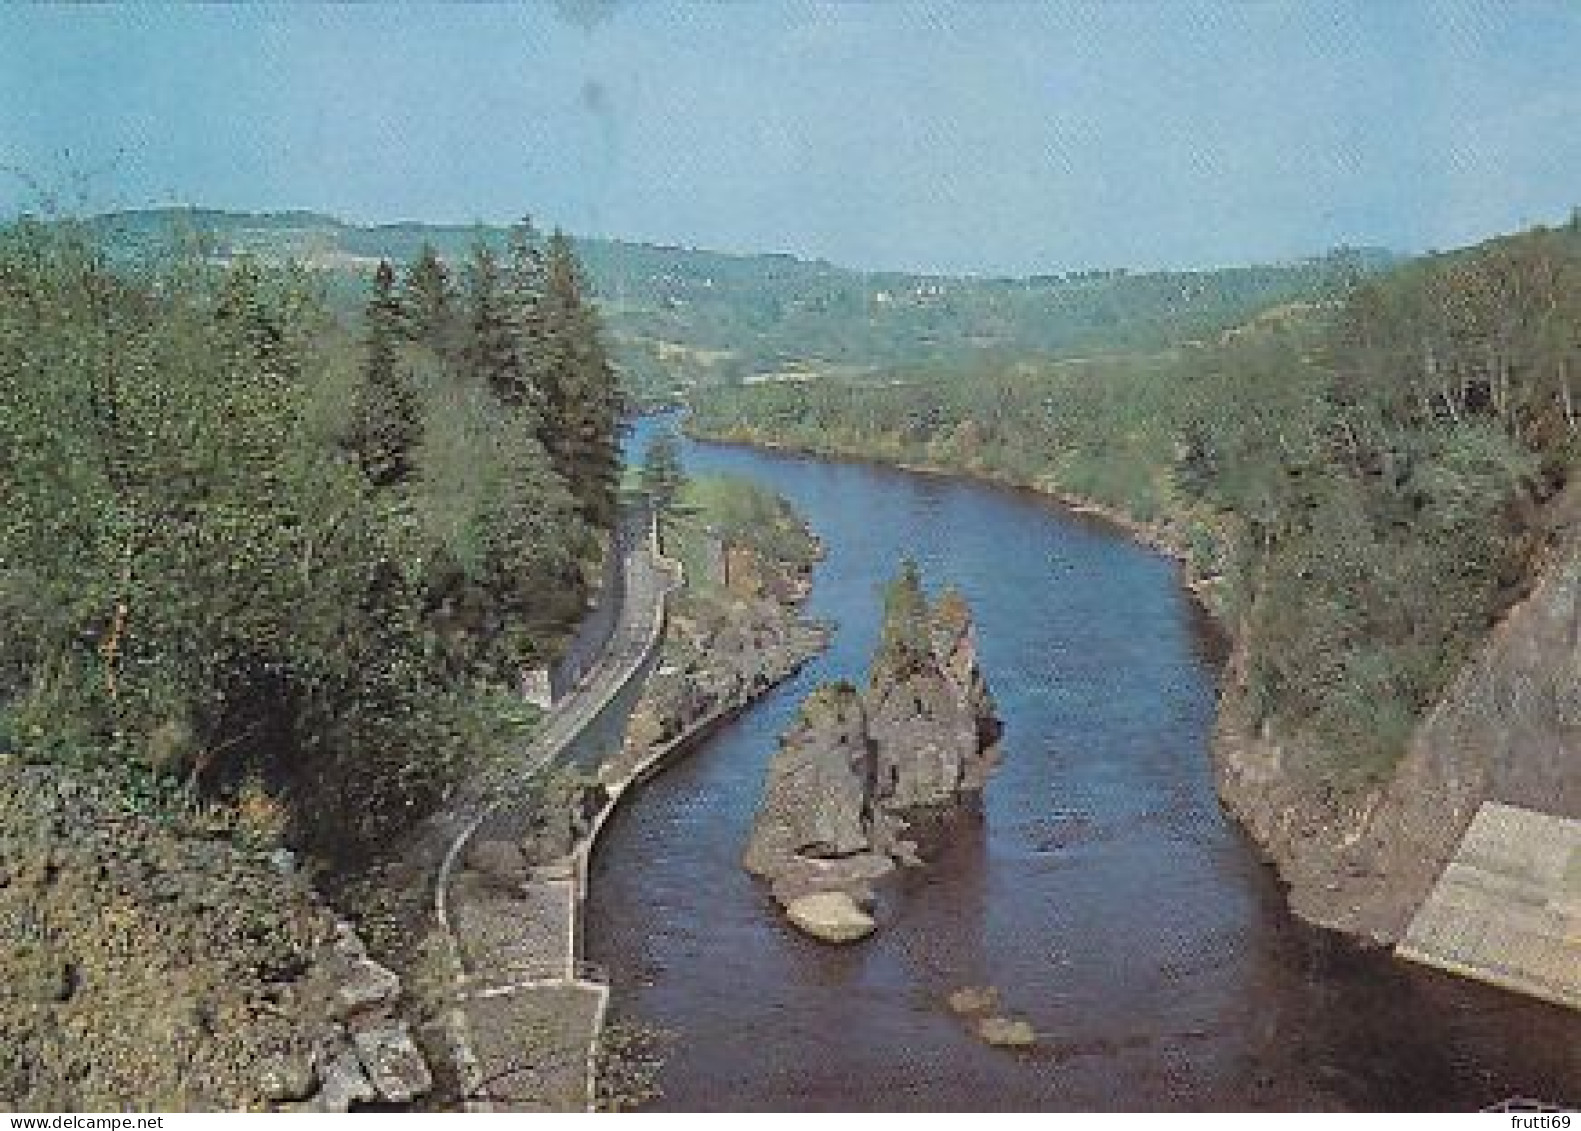 AK 173553 SCOTLAND - Frog Rock - River Beauly - Inverness-shire